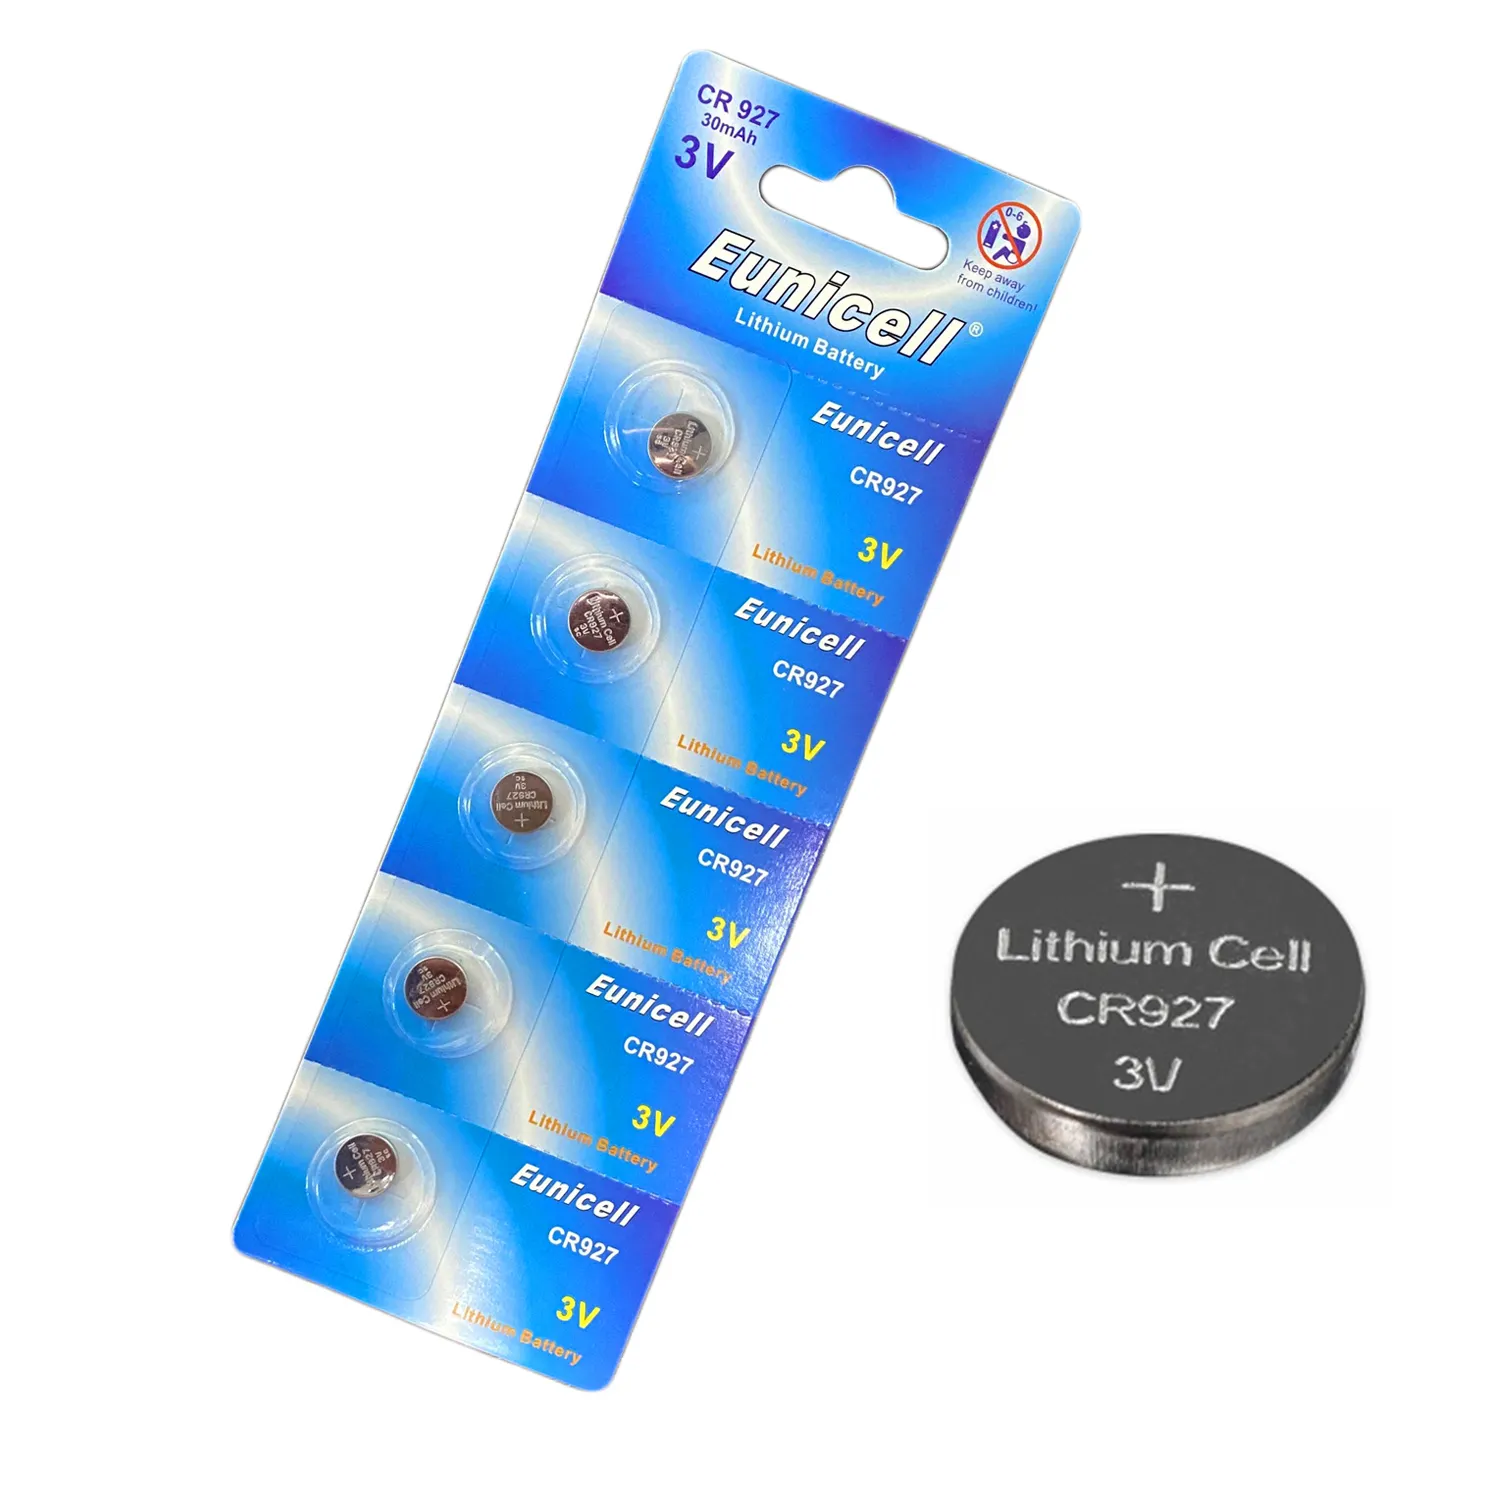 CR927 Li-ion Lithium-ion Button Cell 3V cr927 coin type battery